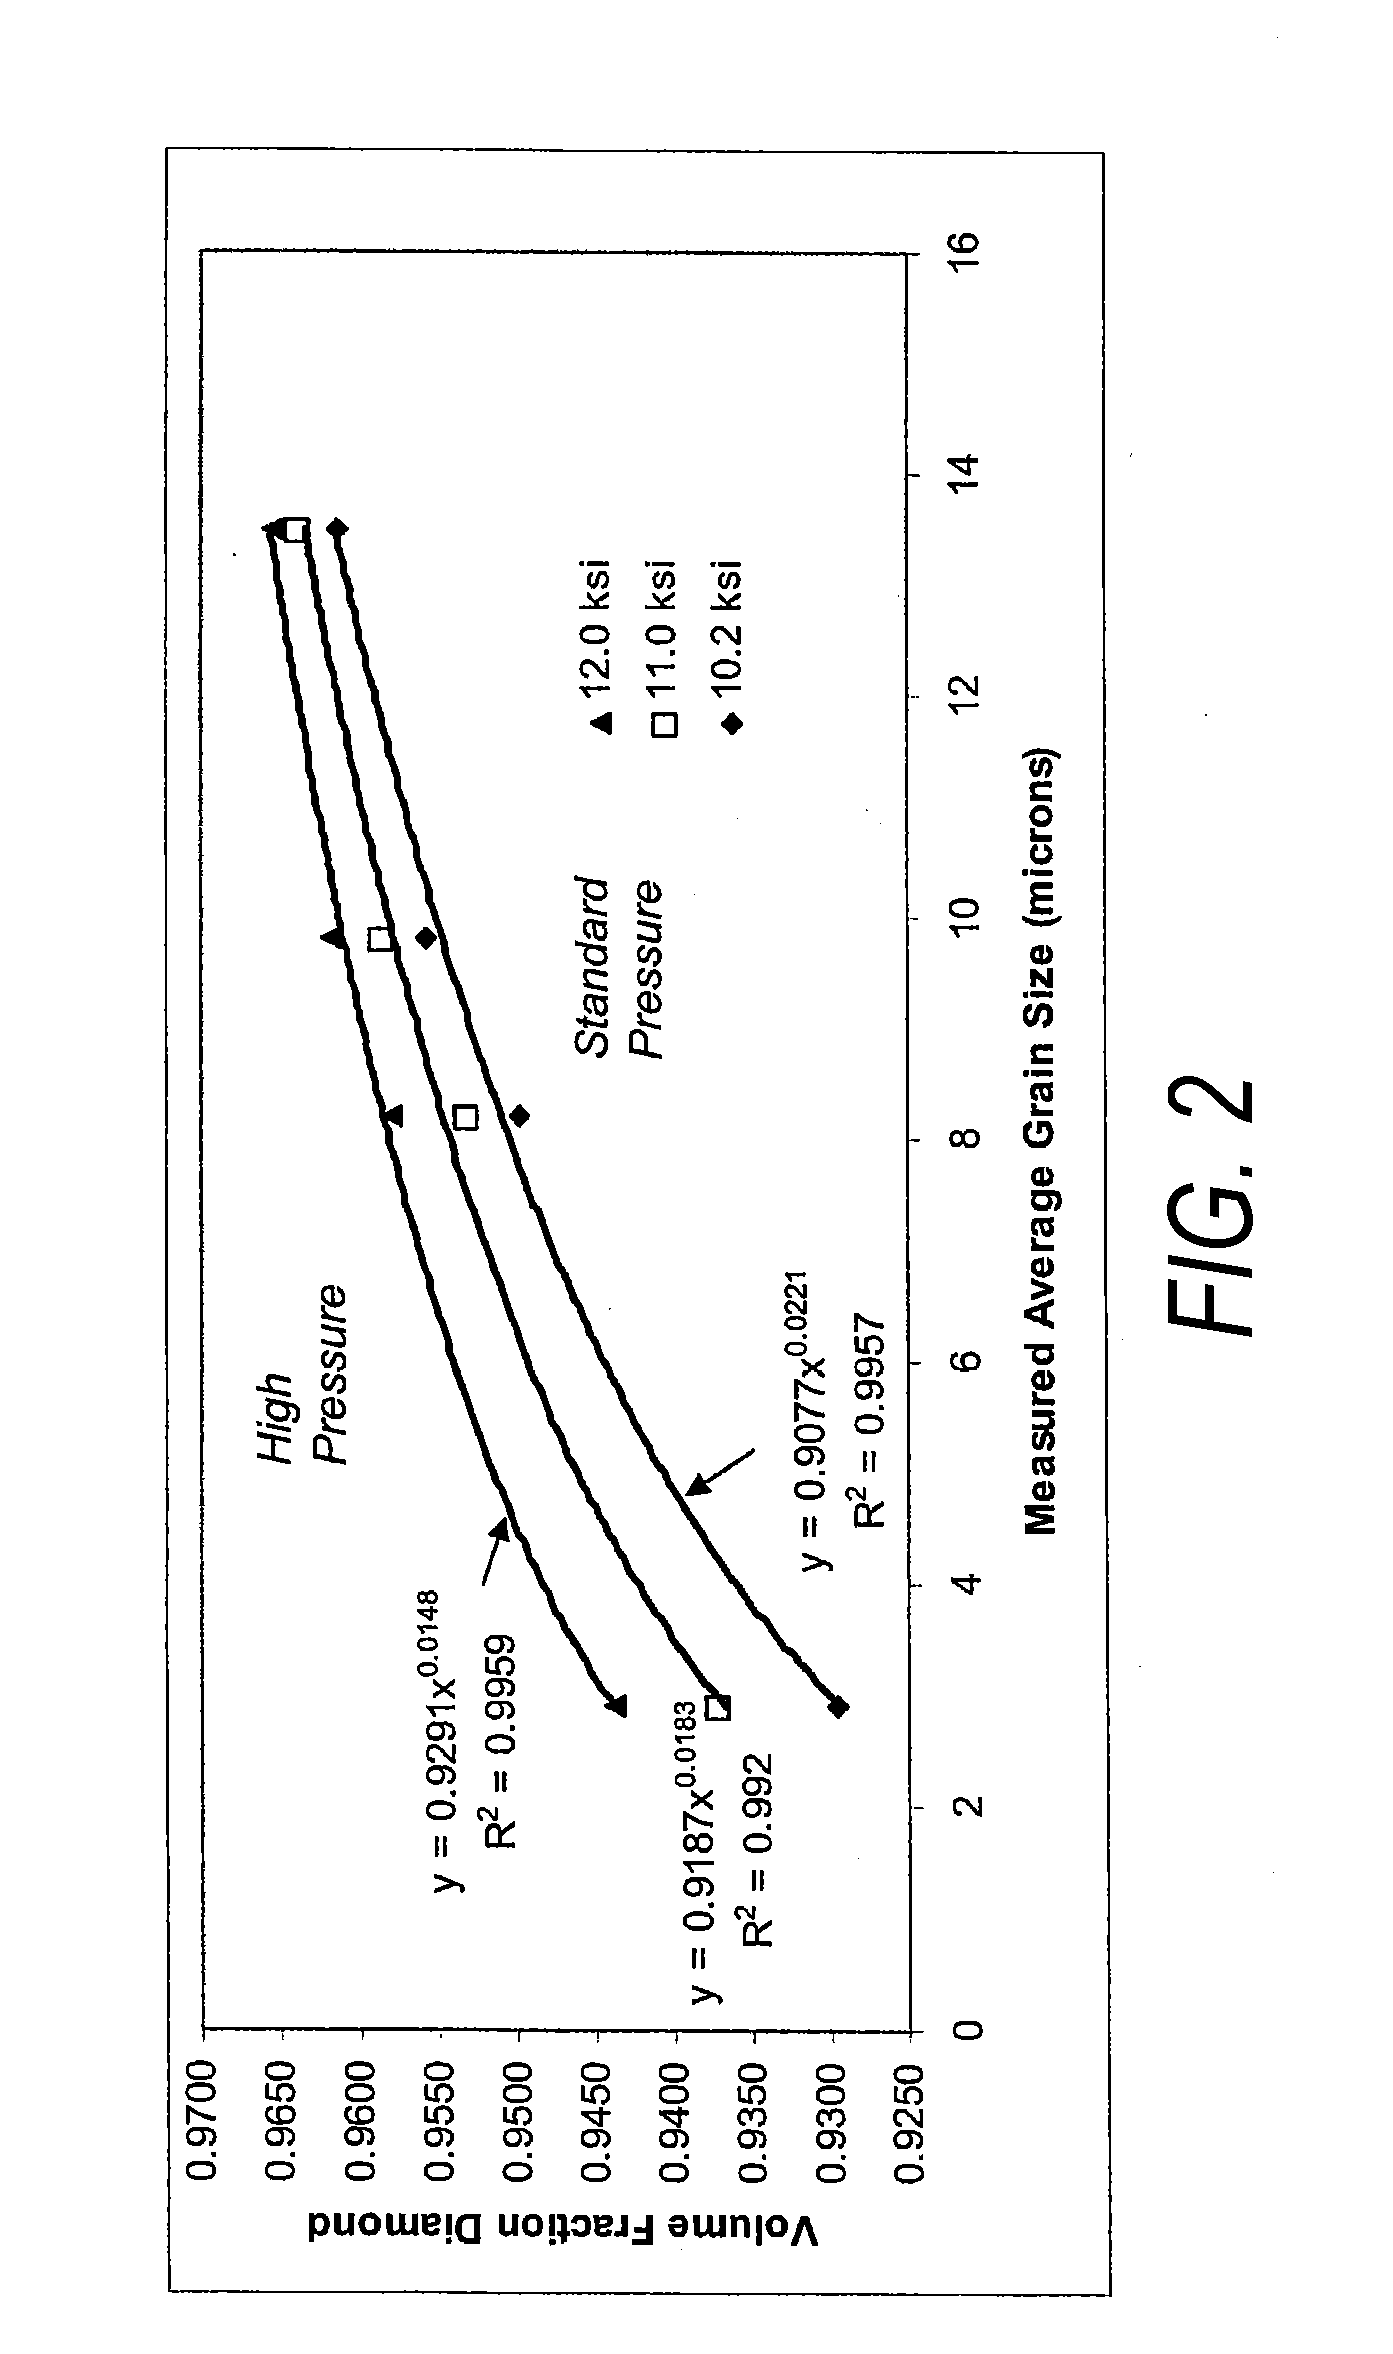 Polycrystalline Diamond Constructions Having Optimized Material Composition